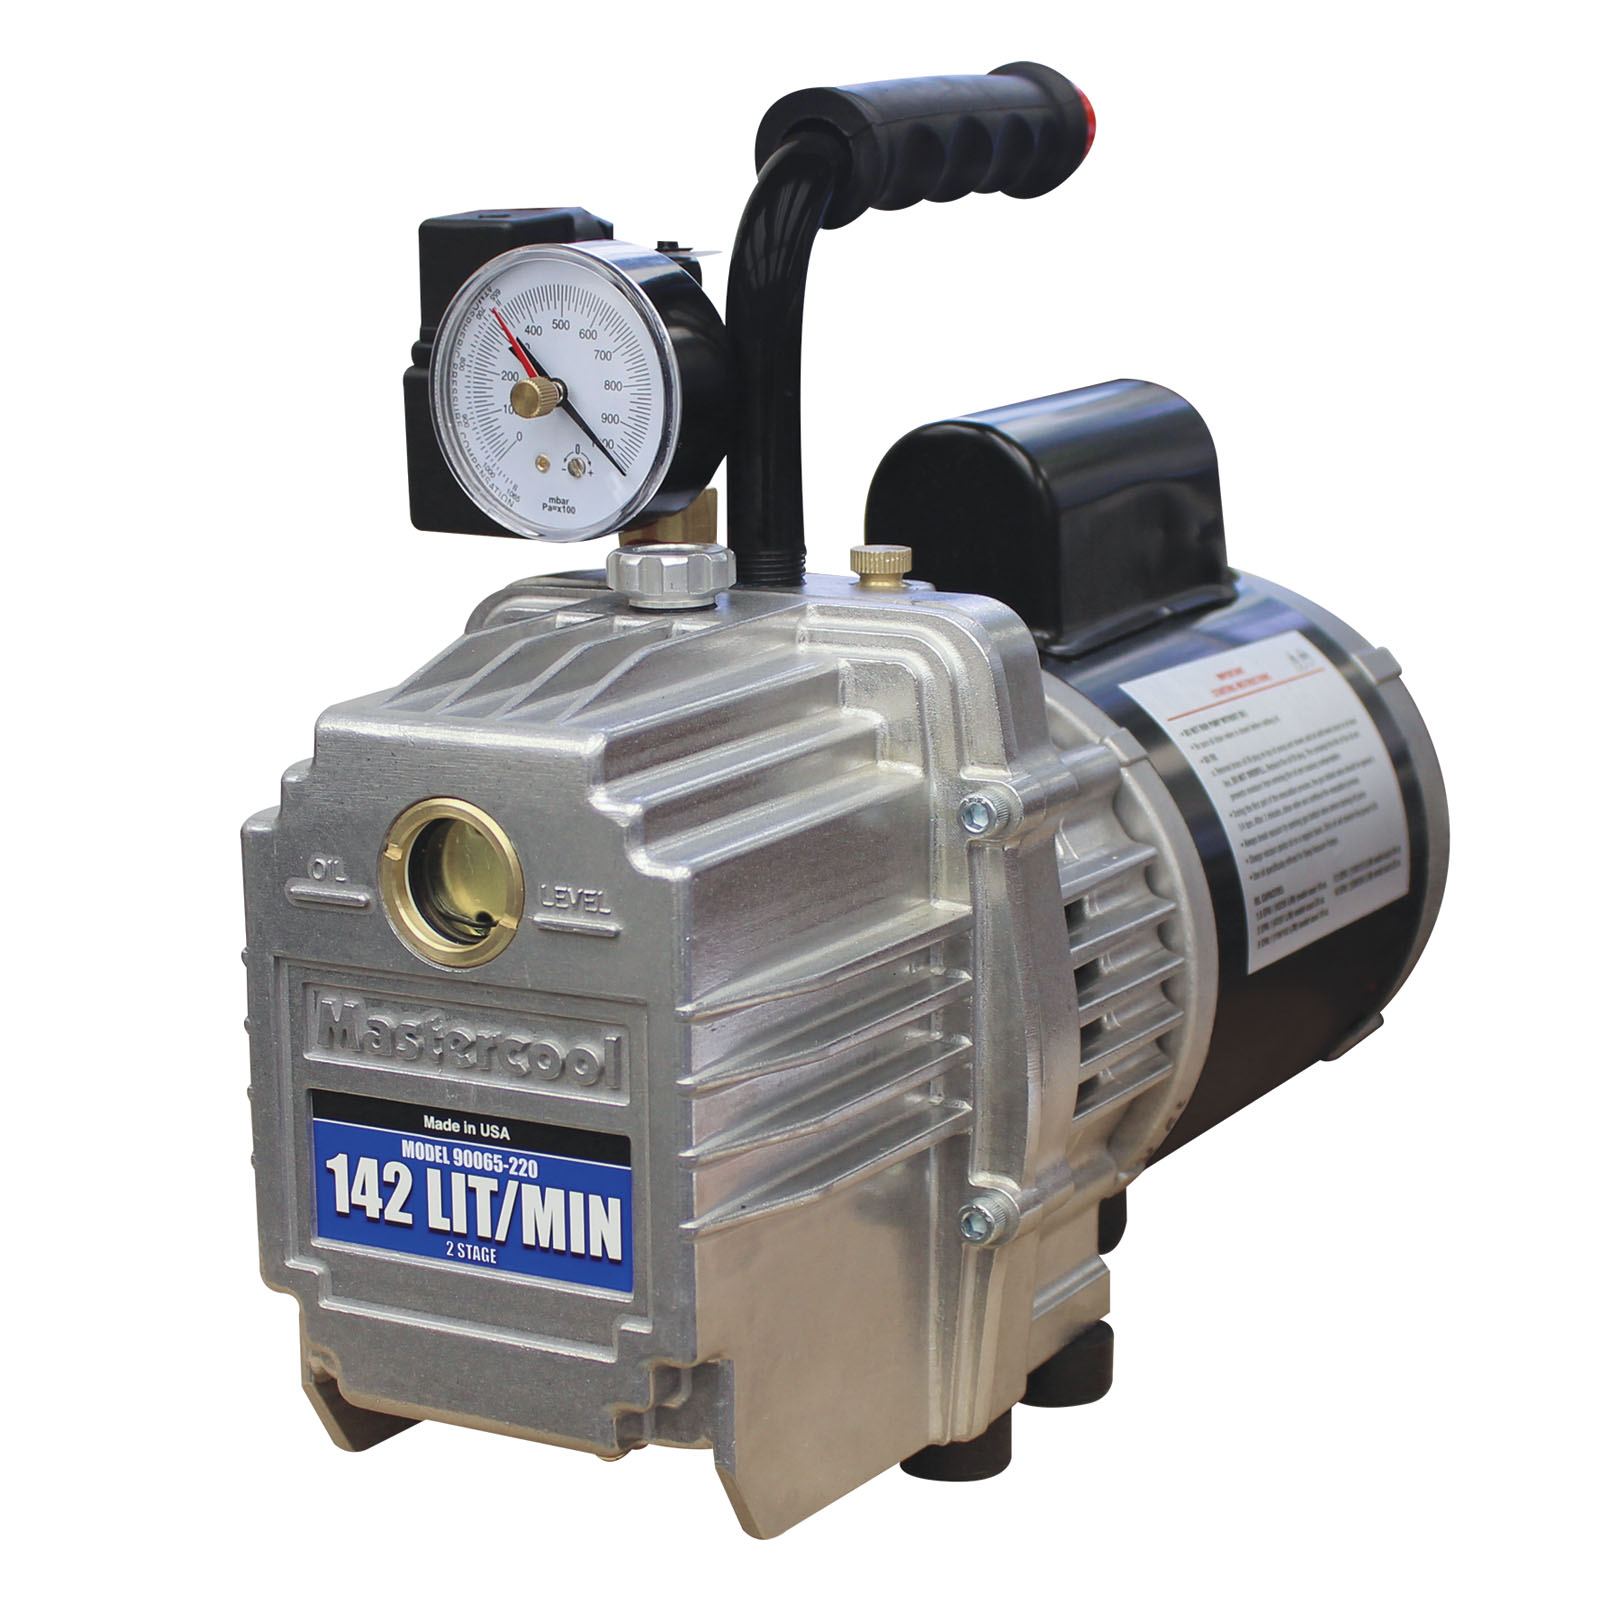 Vacuum Pump V 225 Two-Stage LT min 70 conditioning for Refrigerant Gas 